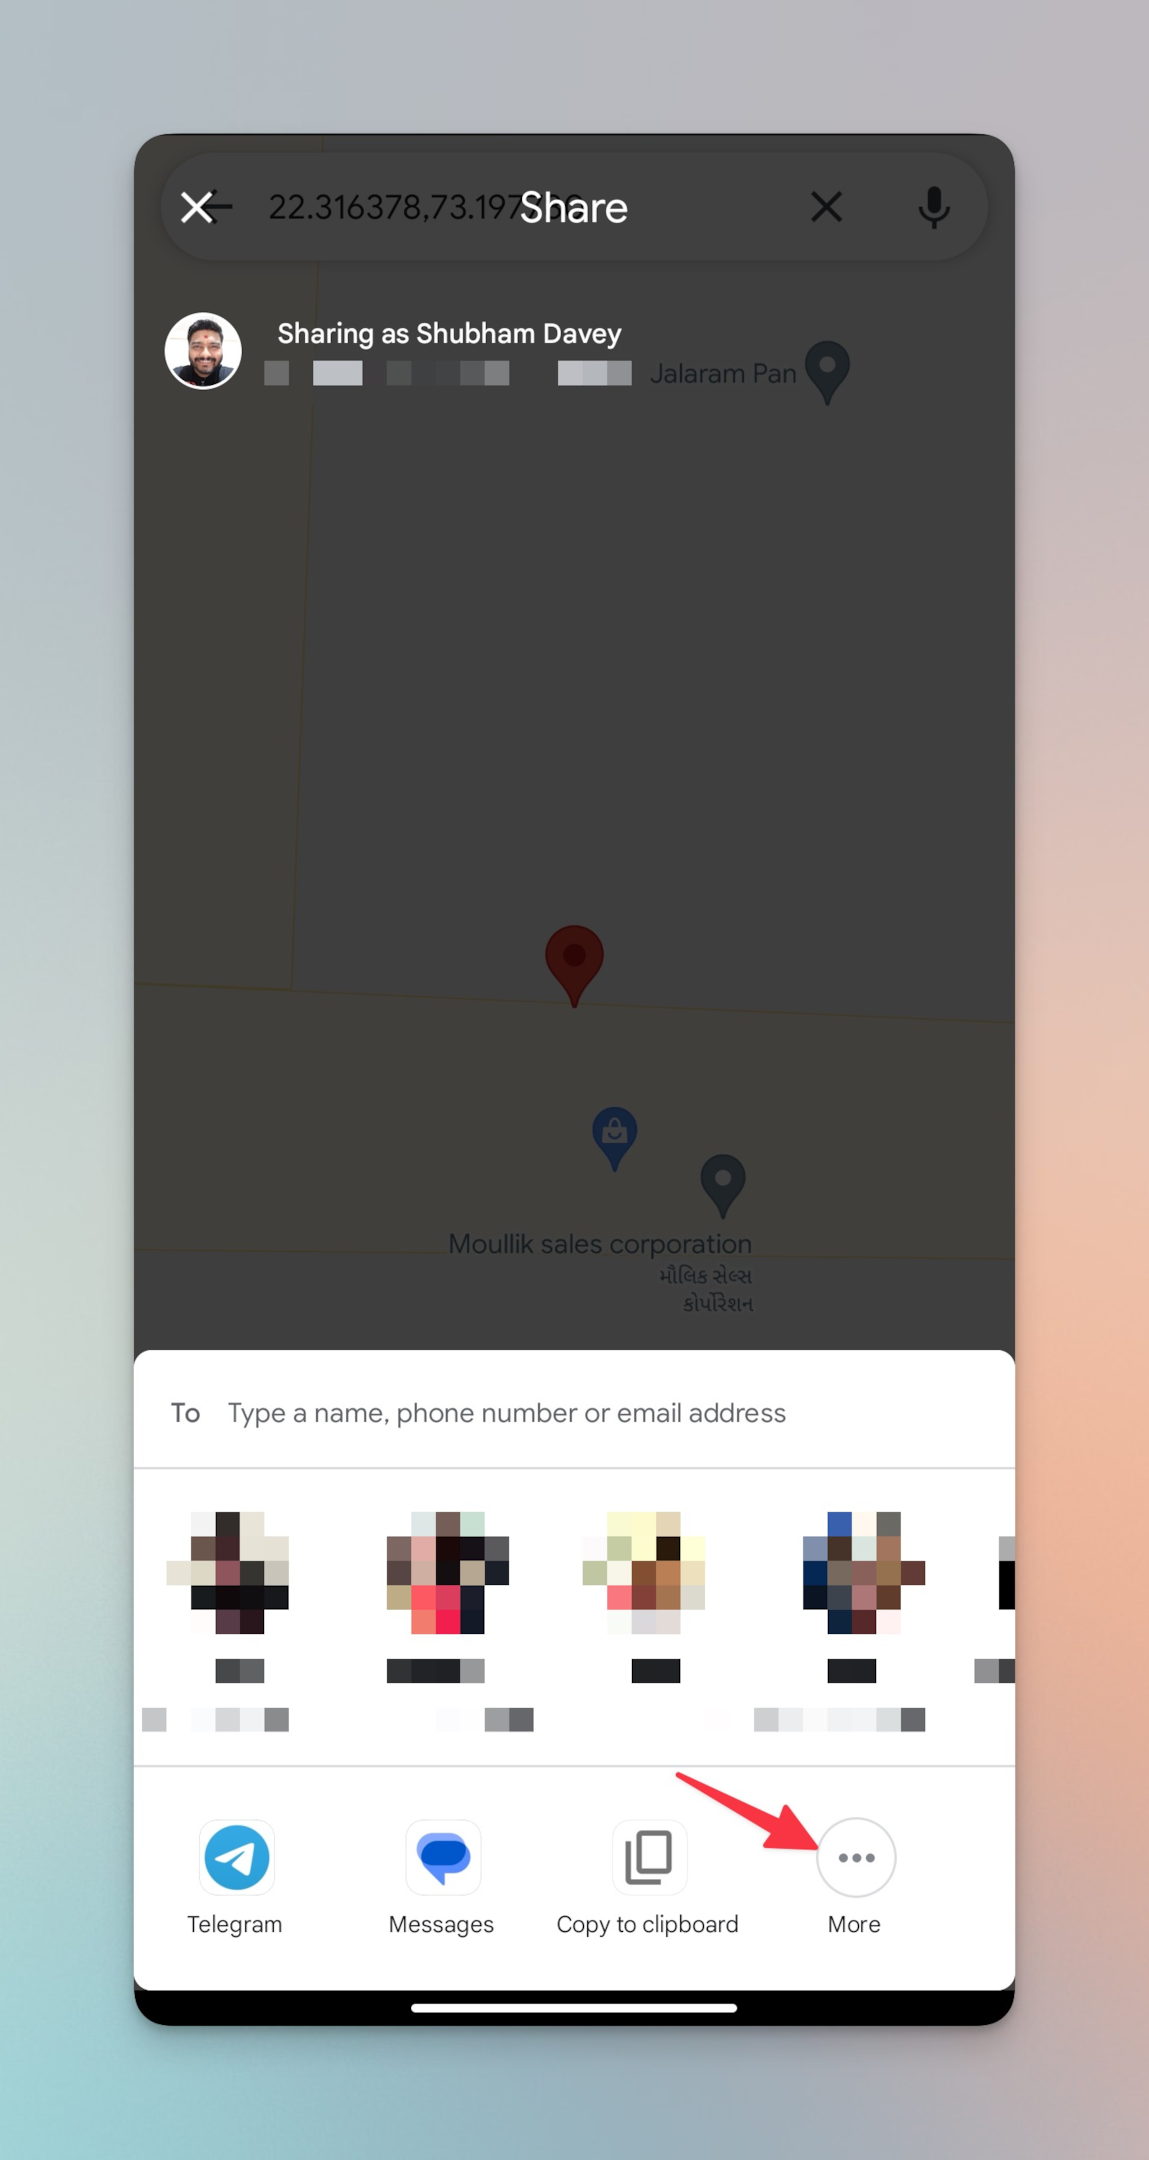 Remote.tools shows how to share pinned locations on Google maps